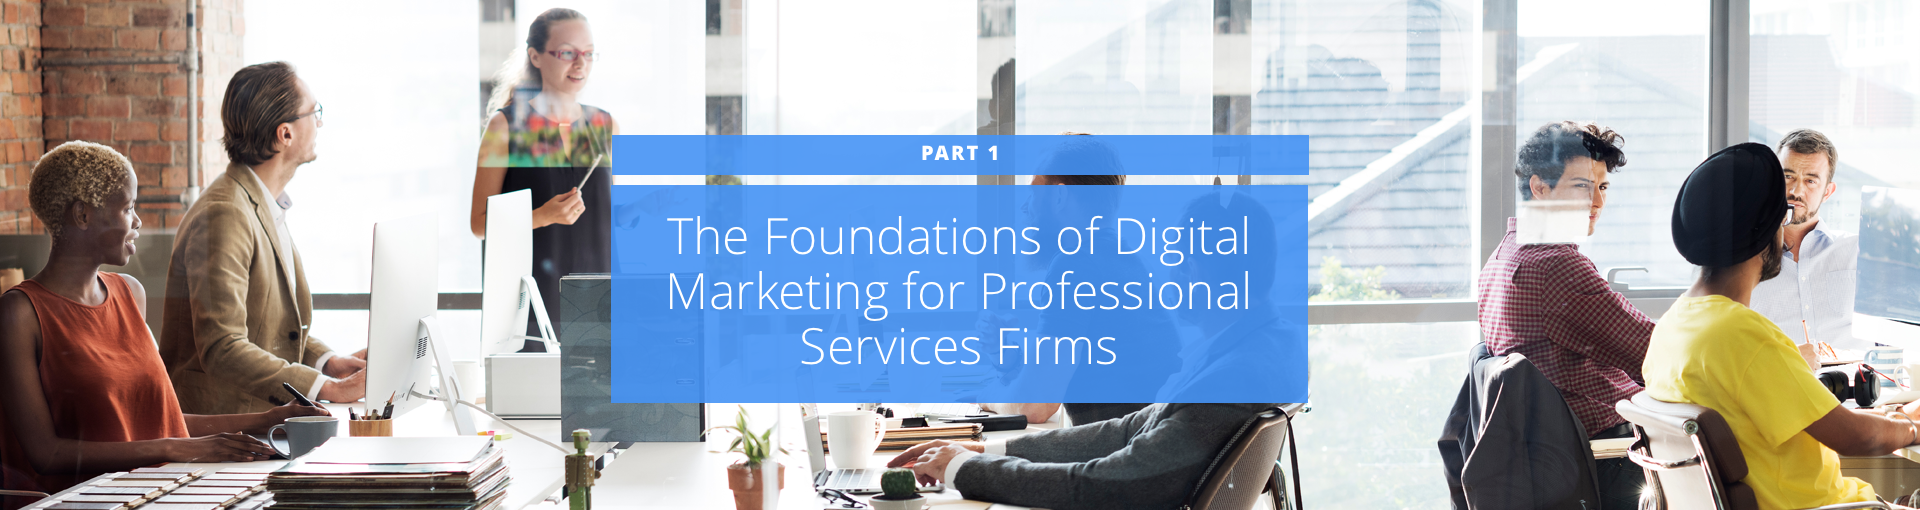 The Foundations of Digital Marketing for Professional Services Firms (Part 1) Featured Image